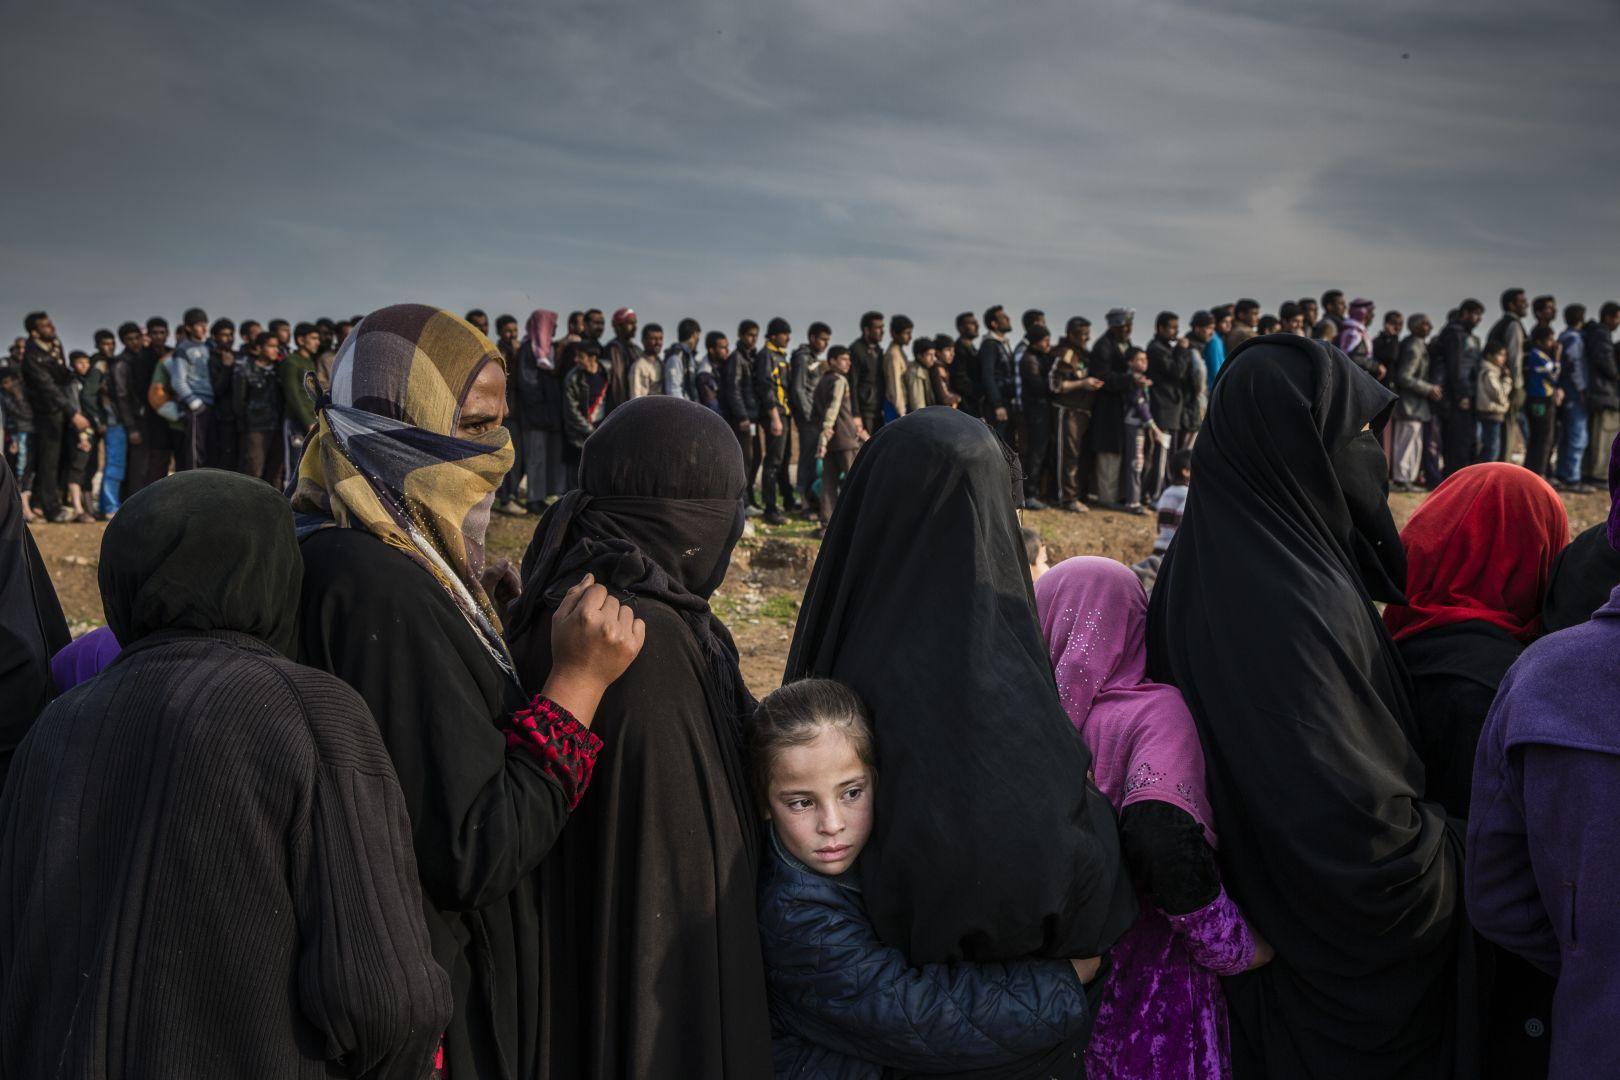 World Press Photo 2018. Ivor Prickett, The Battle for Mosul, 5 marzo 2017 (The New York Times)